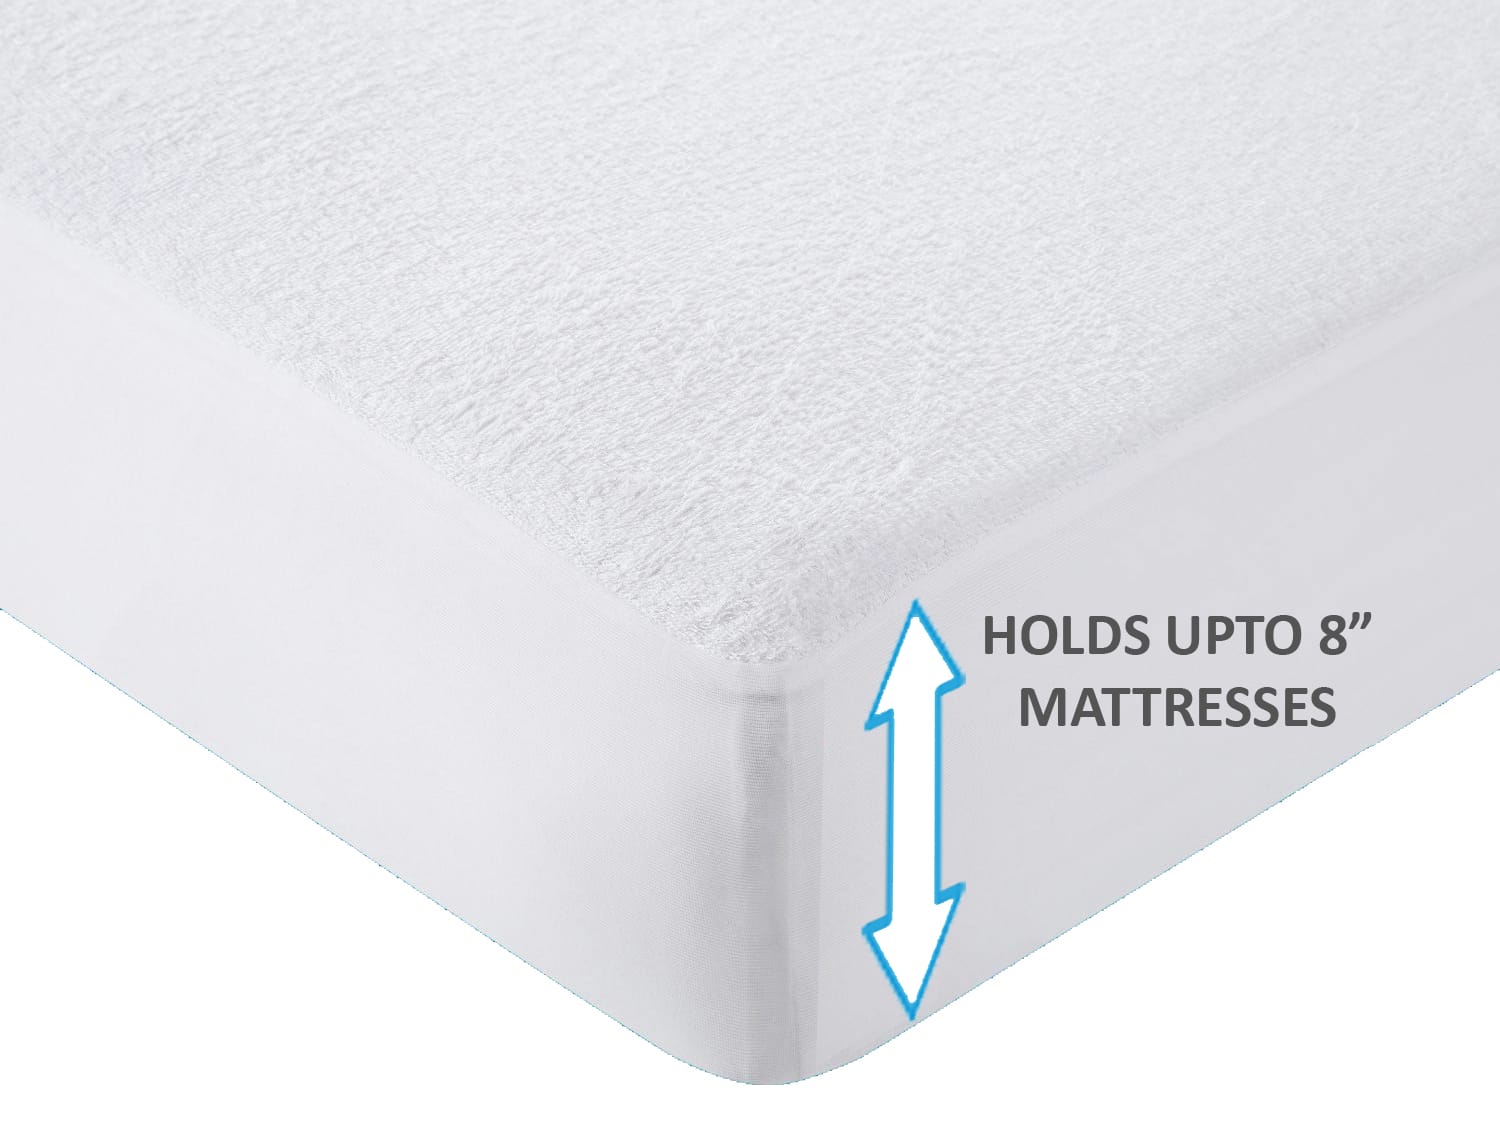 White Water Proof Terry Mattress Protector online at best prices 